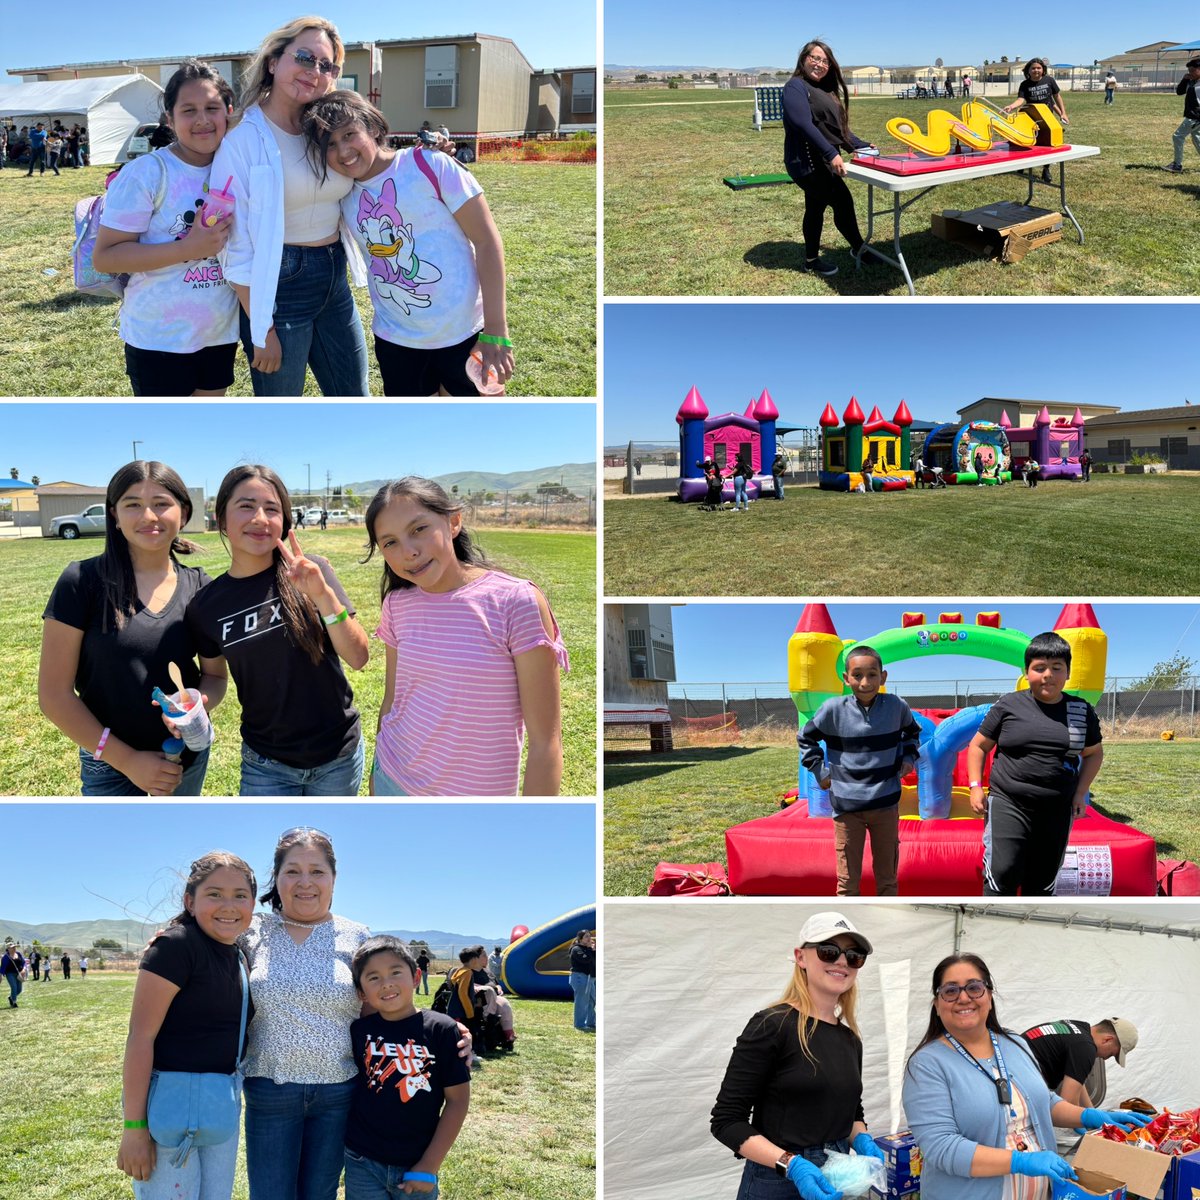 Thank you to everyone who joined us for our Dia del Niño celebration! 🐻‍❄️ A special shoutout to our incredible PTA for making it all possible and filling it with so much fun for our polar bear families! 🥳🐾💙
#ASA #PolarBearPride #GUSD #AllMeansAll